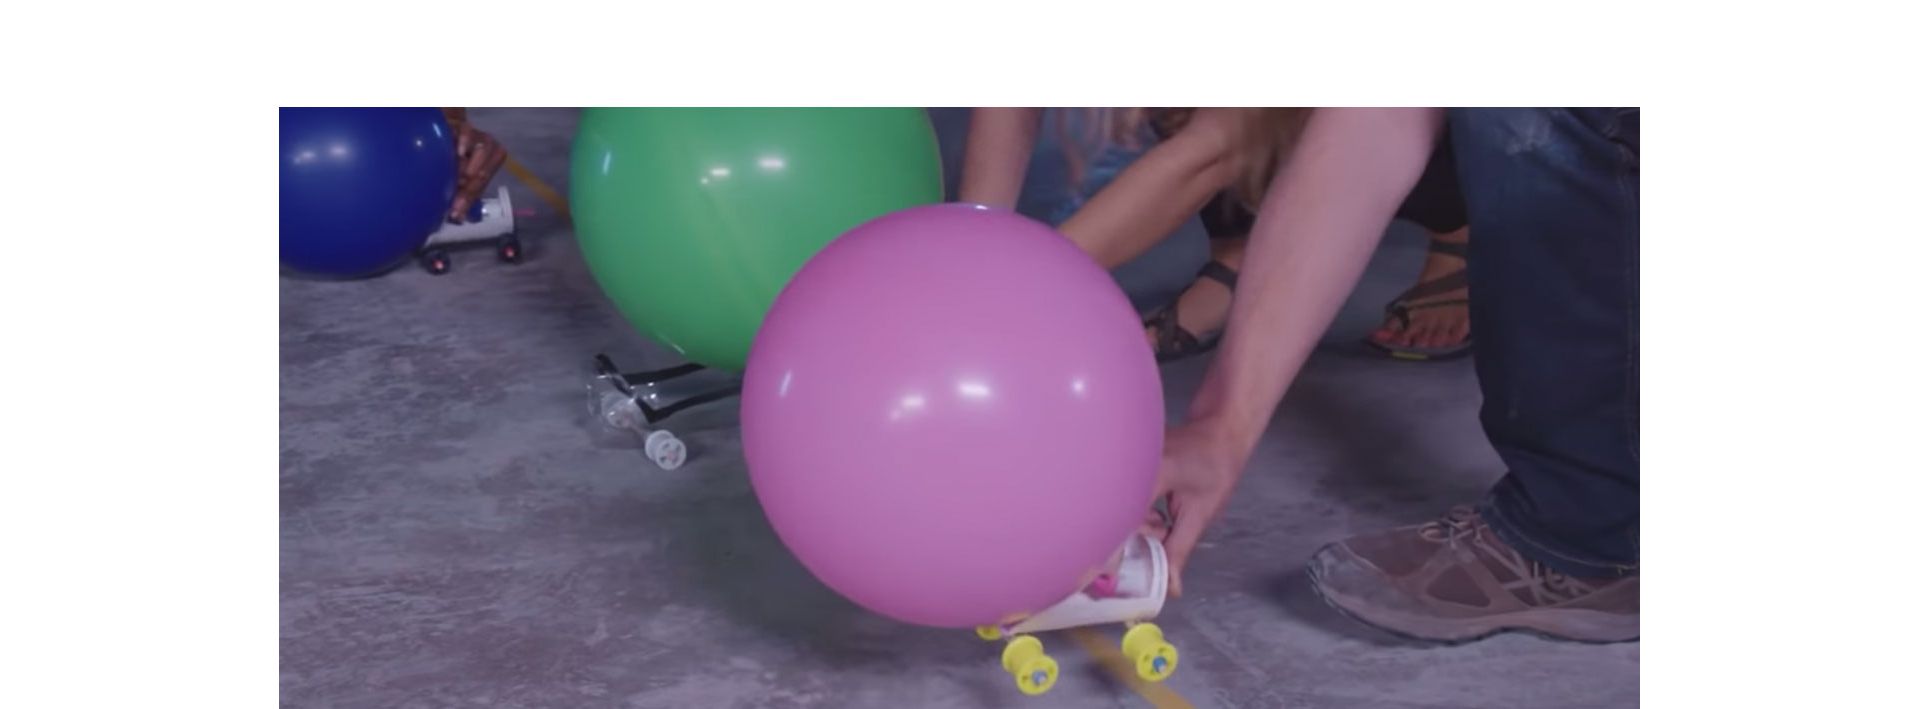 A Dyson engineer shows the balloon powered race car challenge.